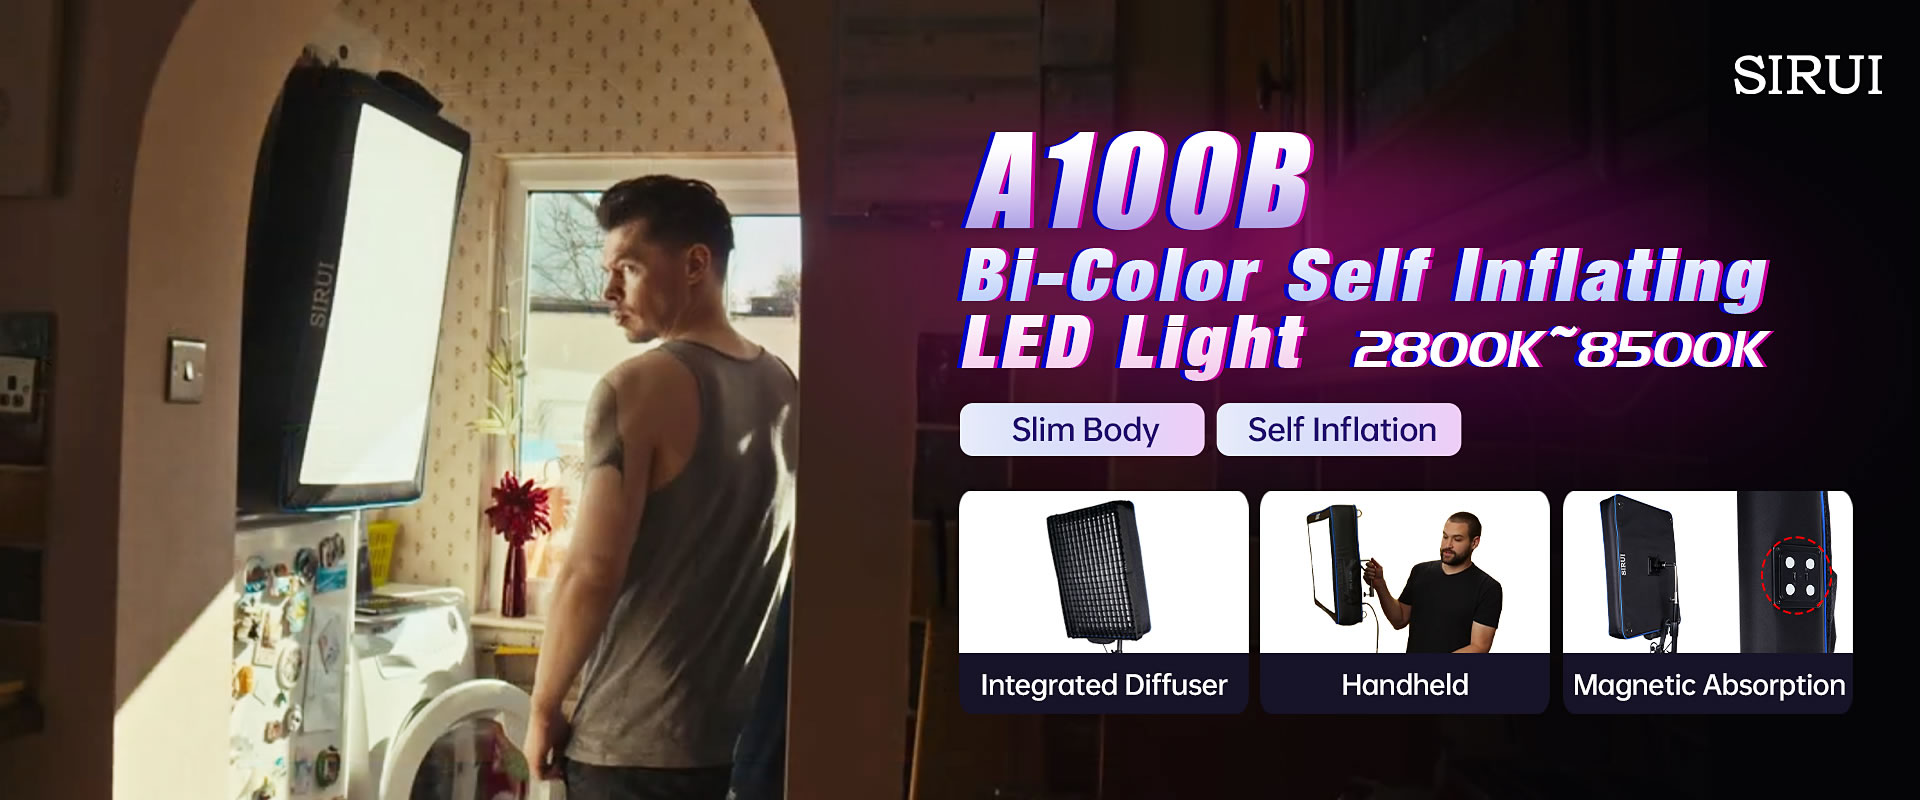 SIRUI A100B Bi-Color Automatic Inflatable Photography Light 